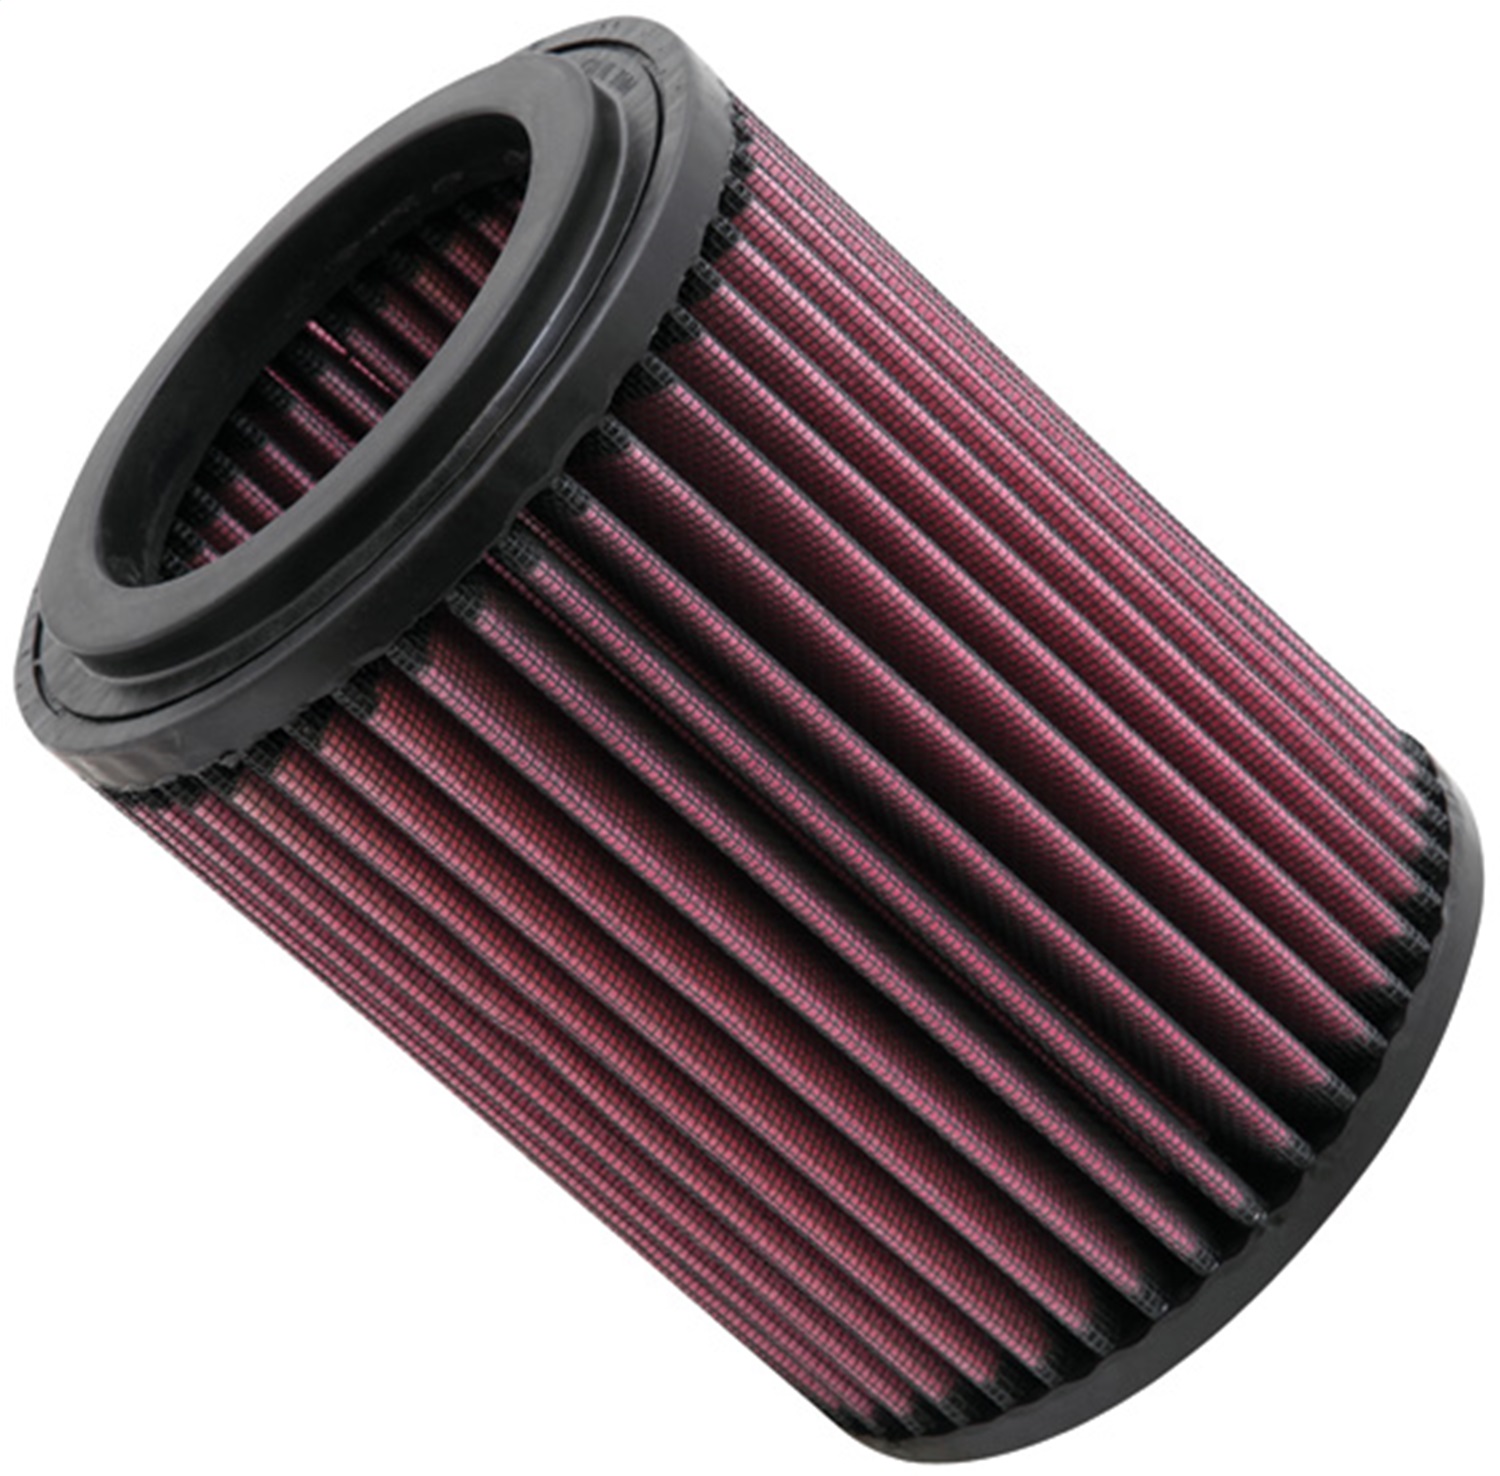 K&N Filters K&N Filters E-2429 Air Filter Fits 02-07 Civic CR-V RSX